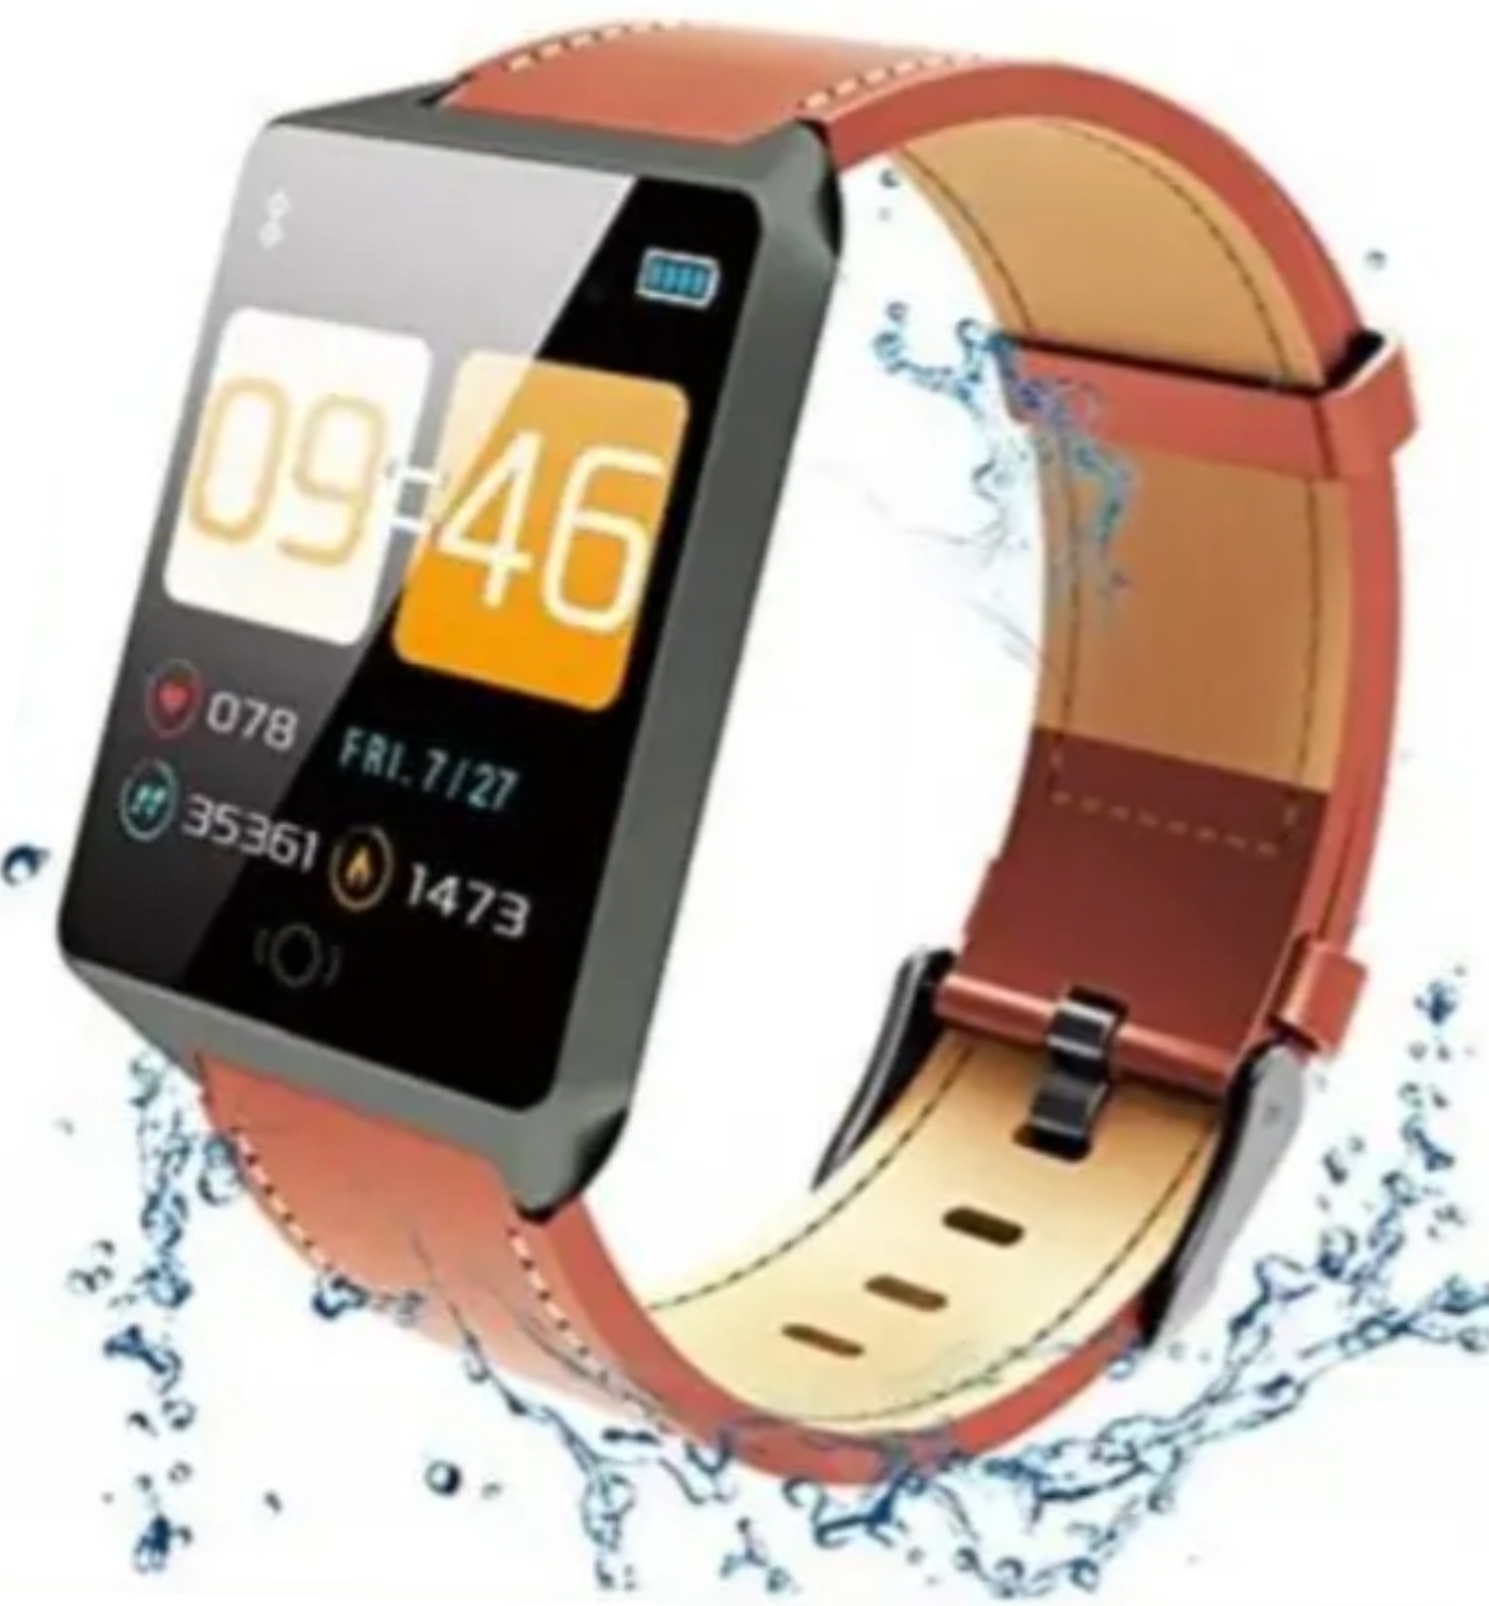 The Gelrova Intelligent CK19 Fitness Tracker, With An IP67 Waterproof & Dustproof 1.3" OLED Full HD Colour Screen. Plus A Maroon/Brown Water Resistant Wrist Strap. RRP£37.99